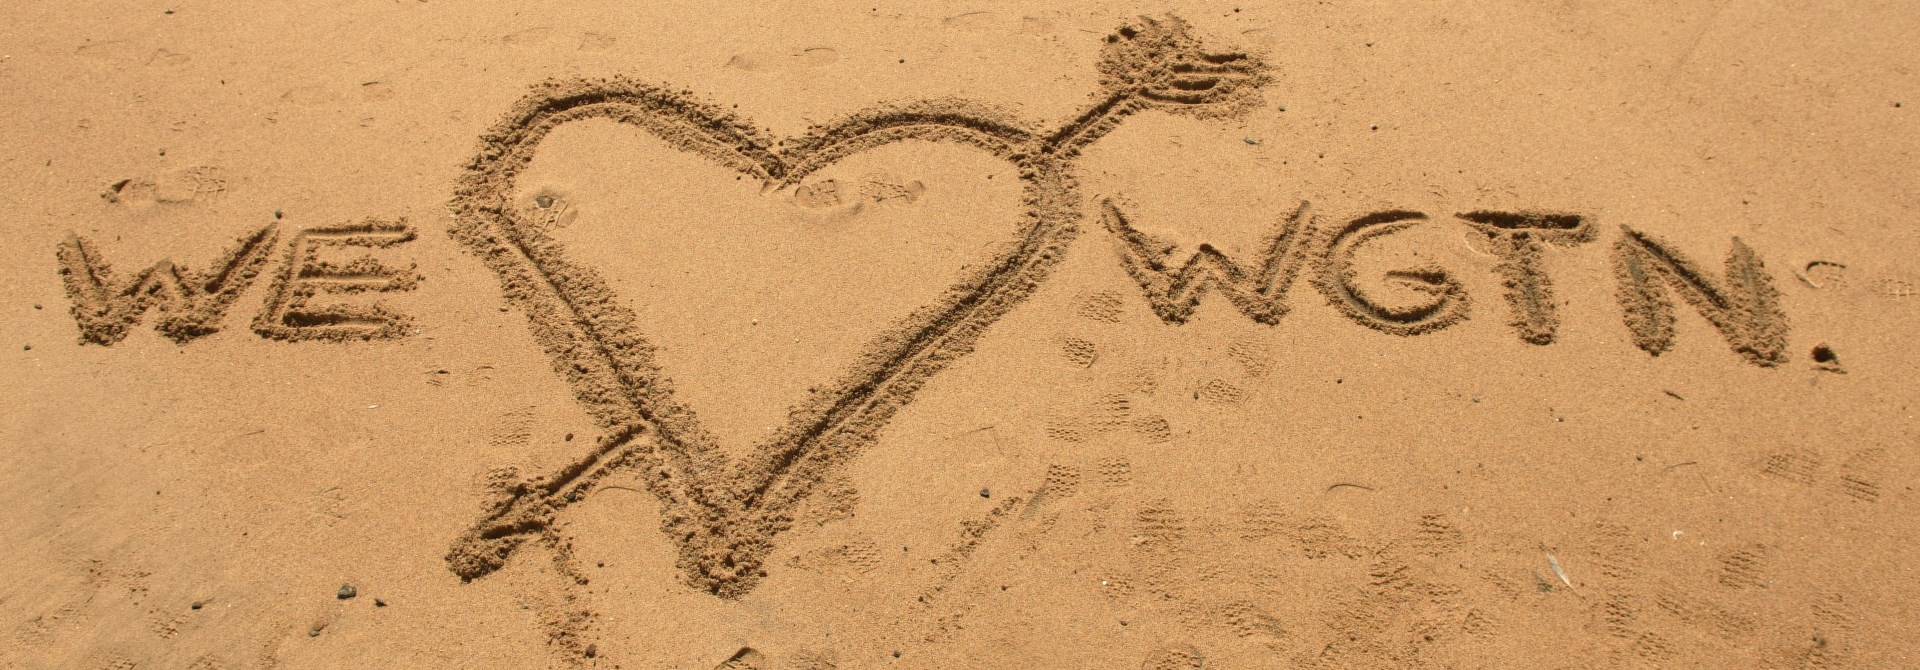 A love heart drawn in the sand with the words 'we' and 'Wellington' written on either side.